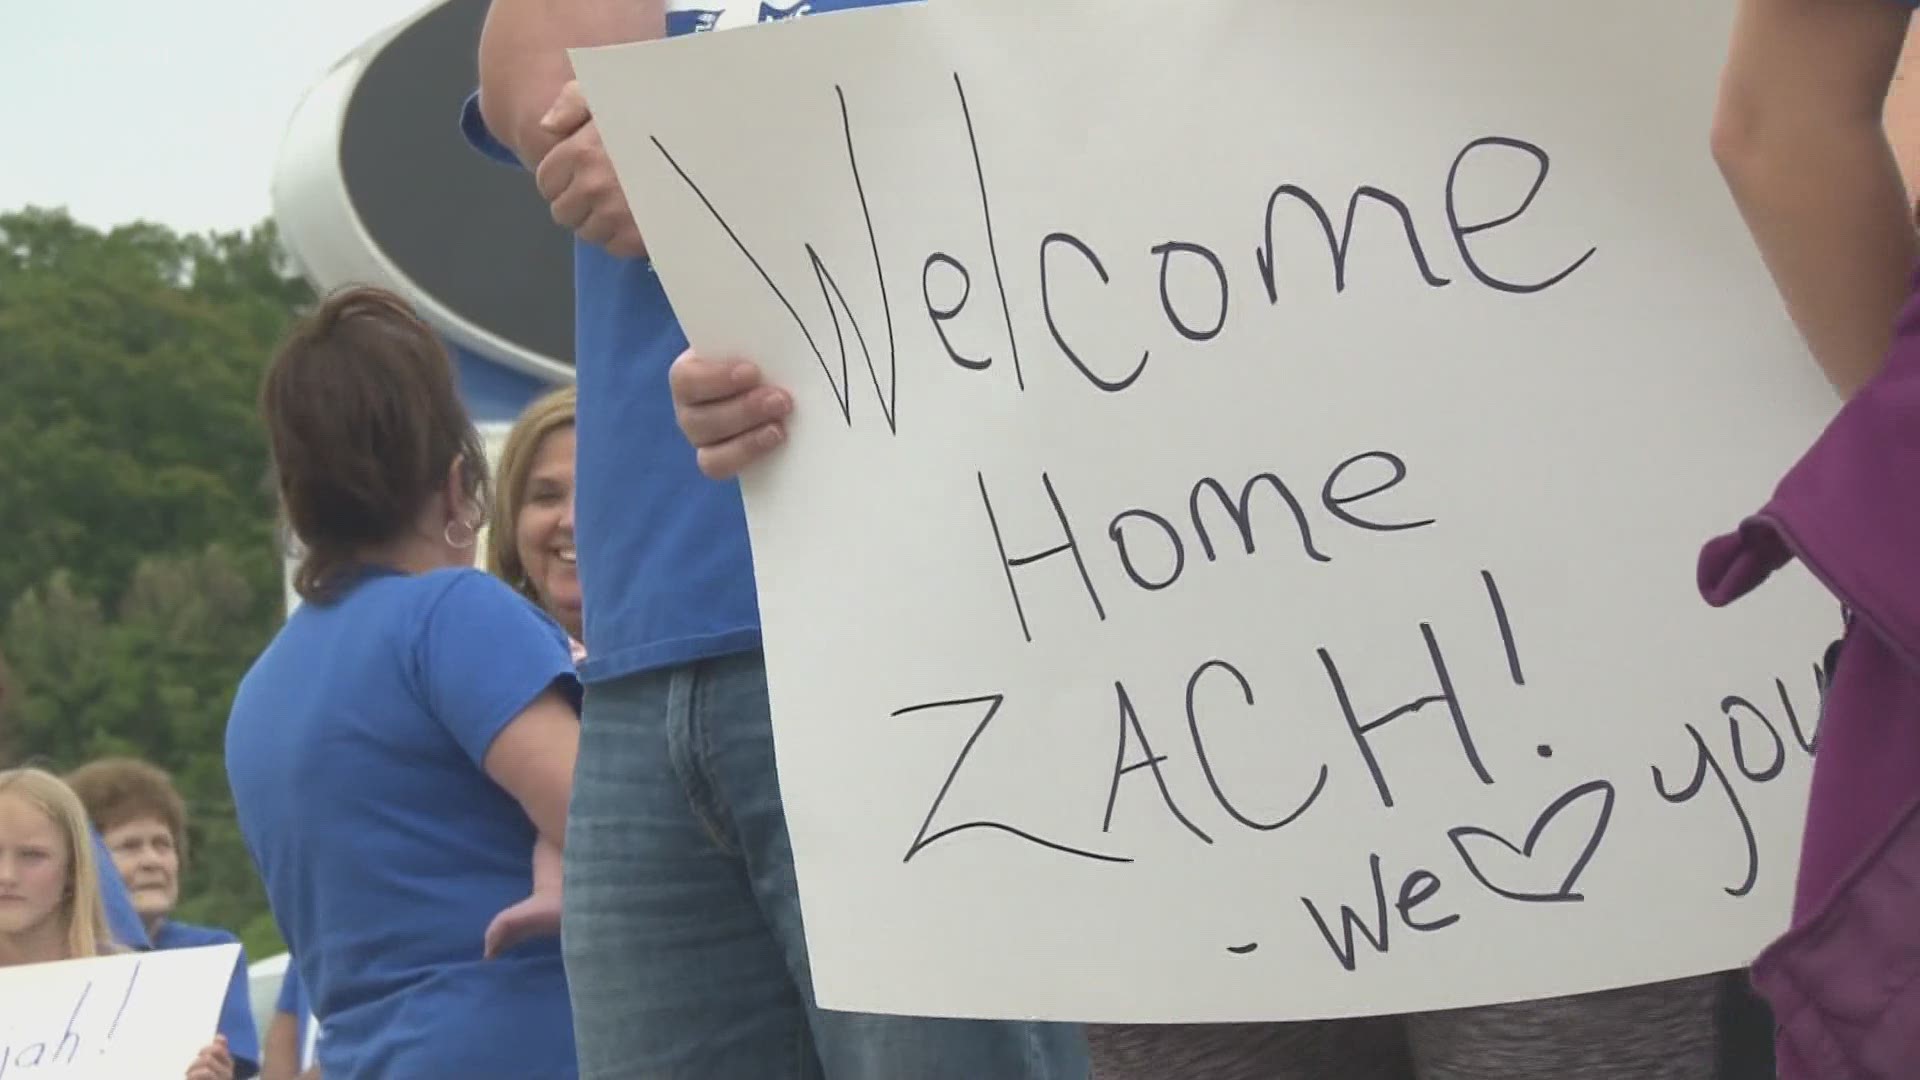 After more than 200 days away, a LaFollette pastor is back home.